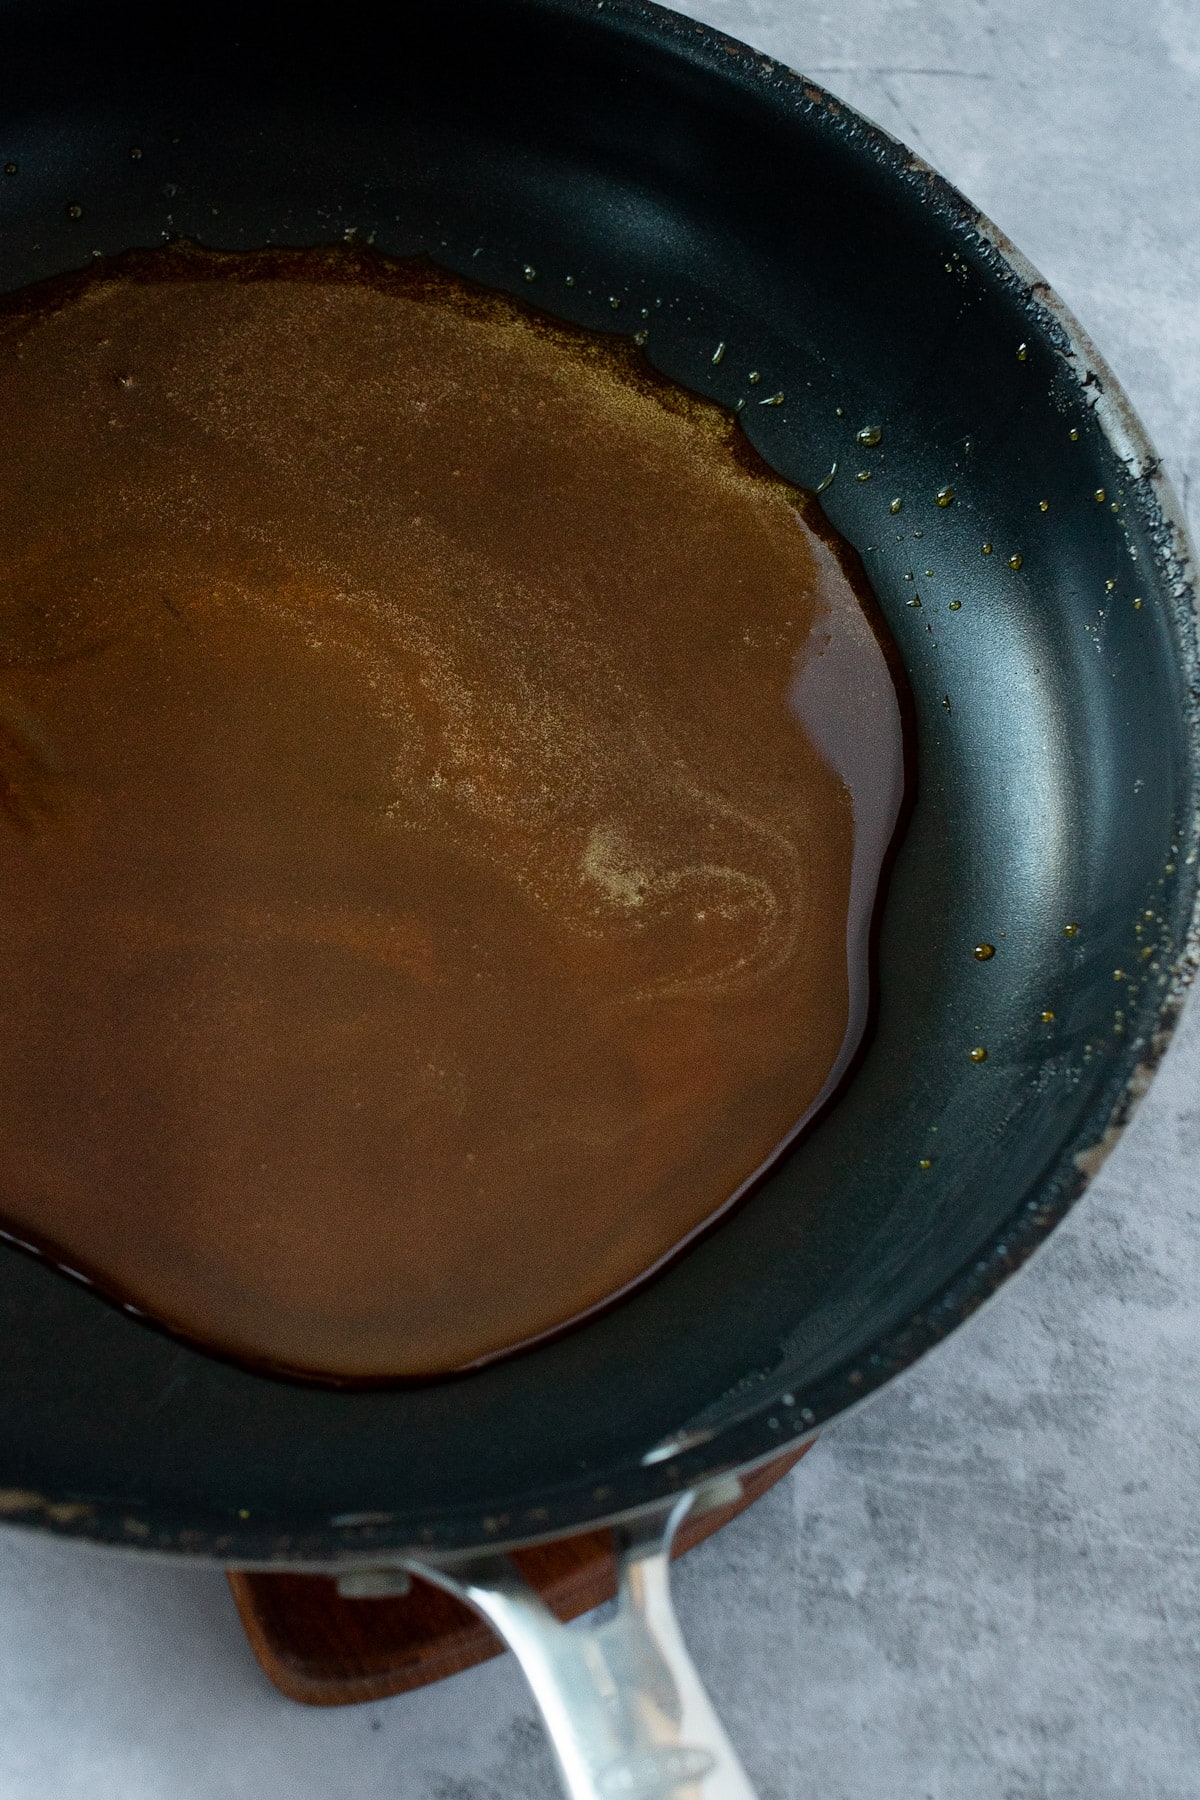 Melted sugar used to make the caramel sauce in a black saucepan.